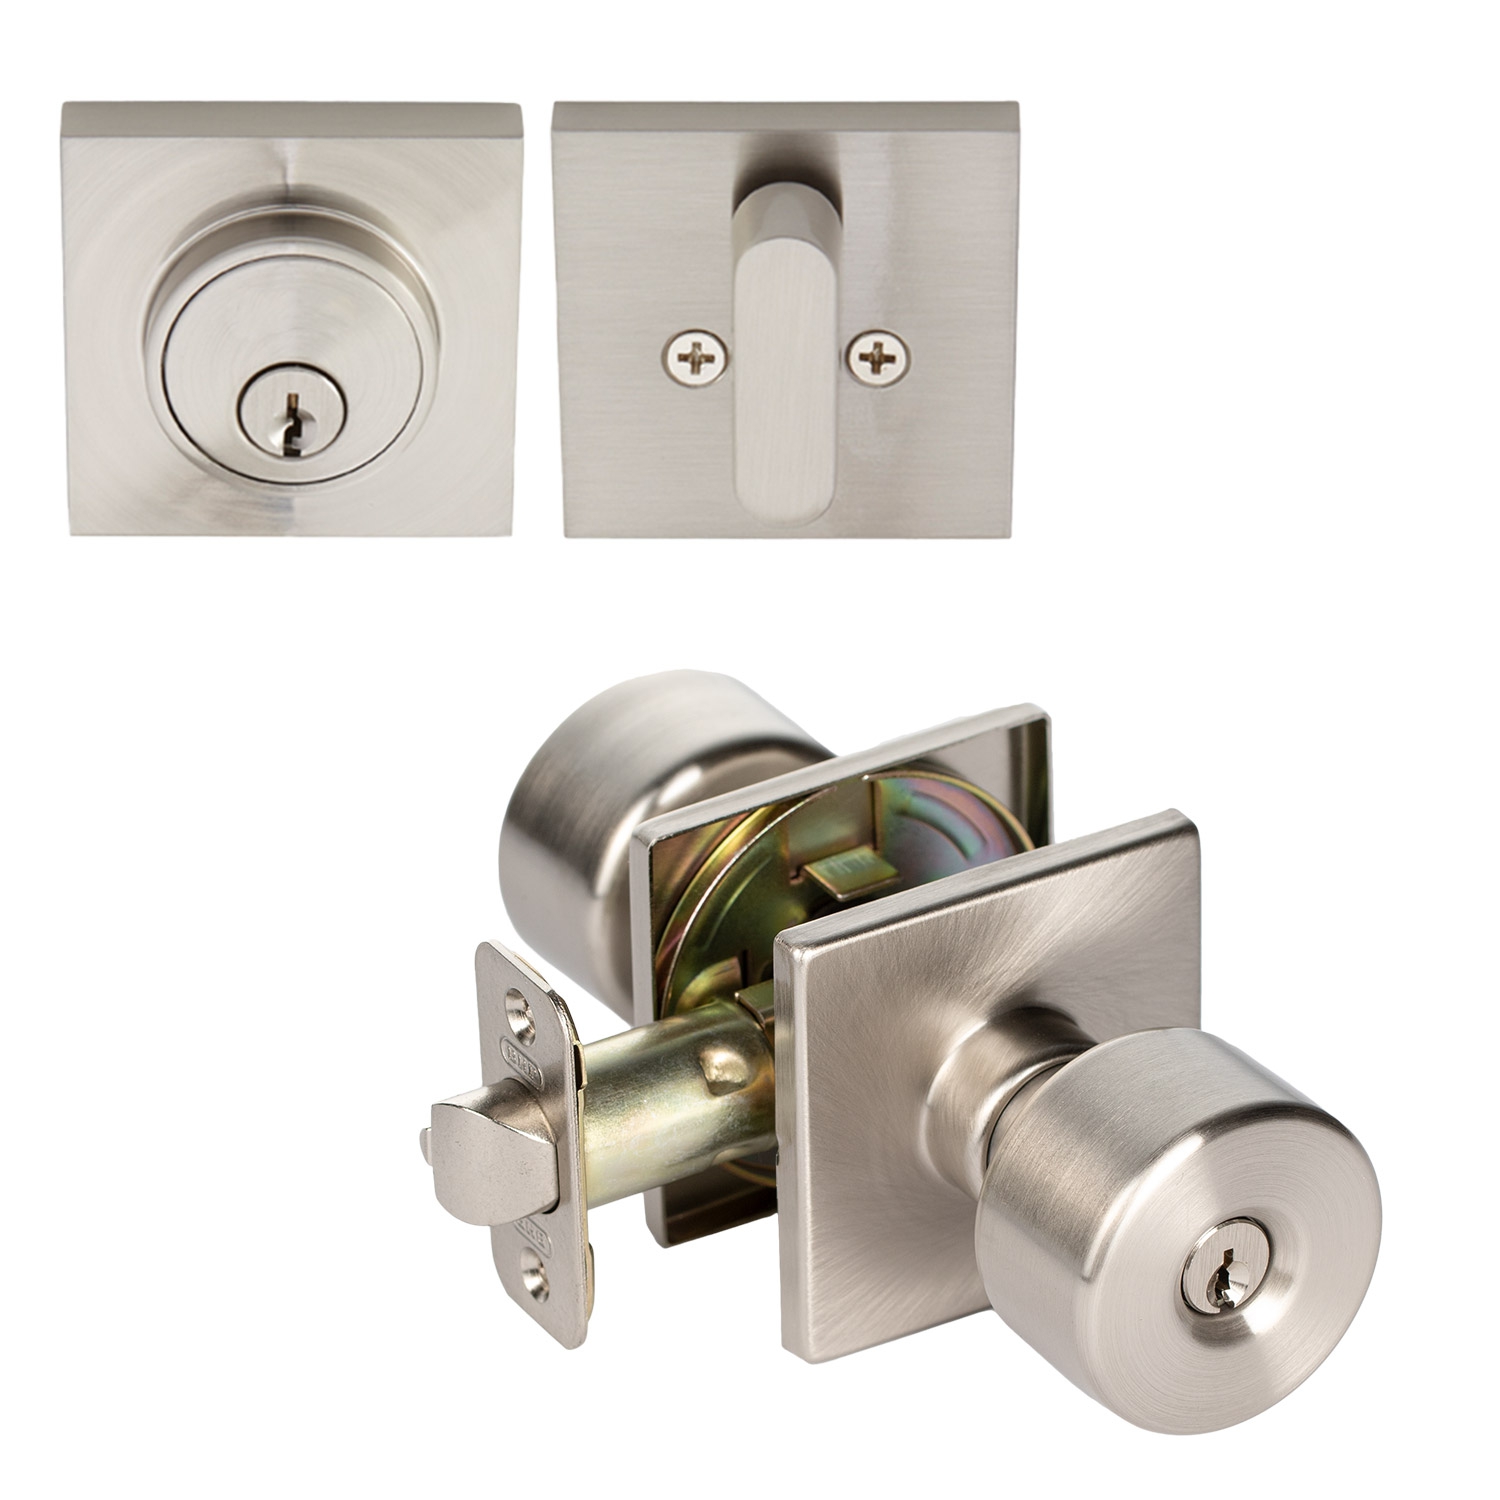 Satin Nickel Flat Keyed Entry Door Knob / Deadbolt Combo Pack with Square Rose - image 1 of 4